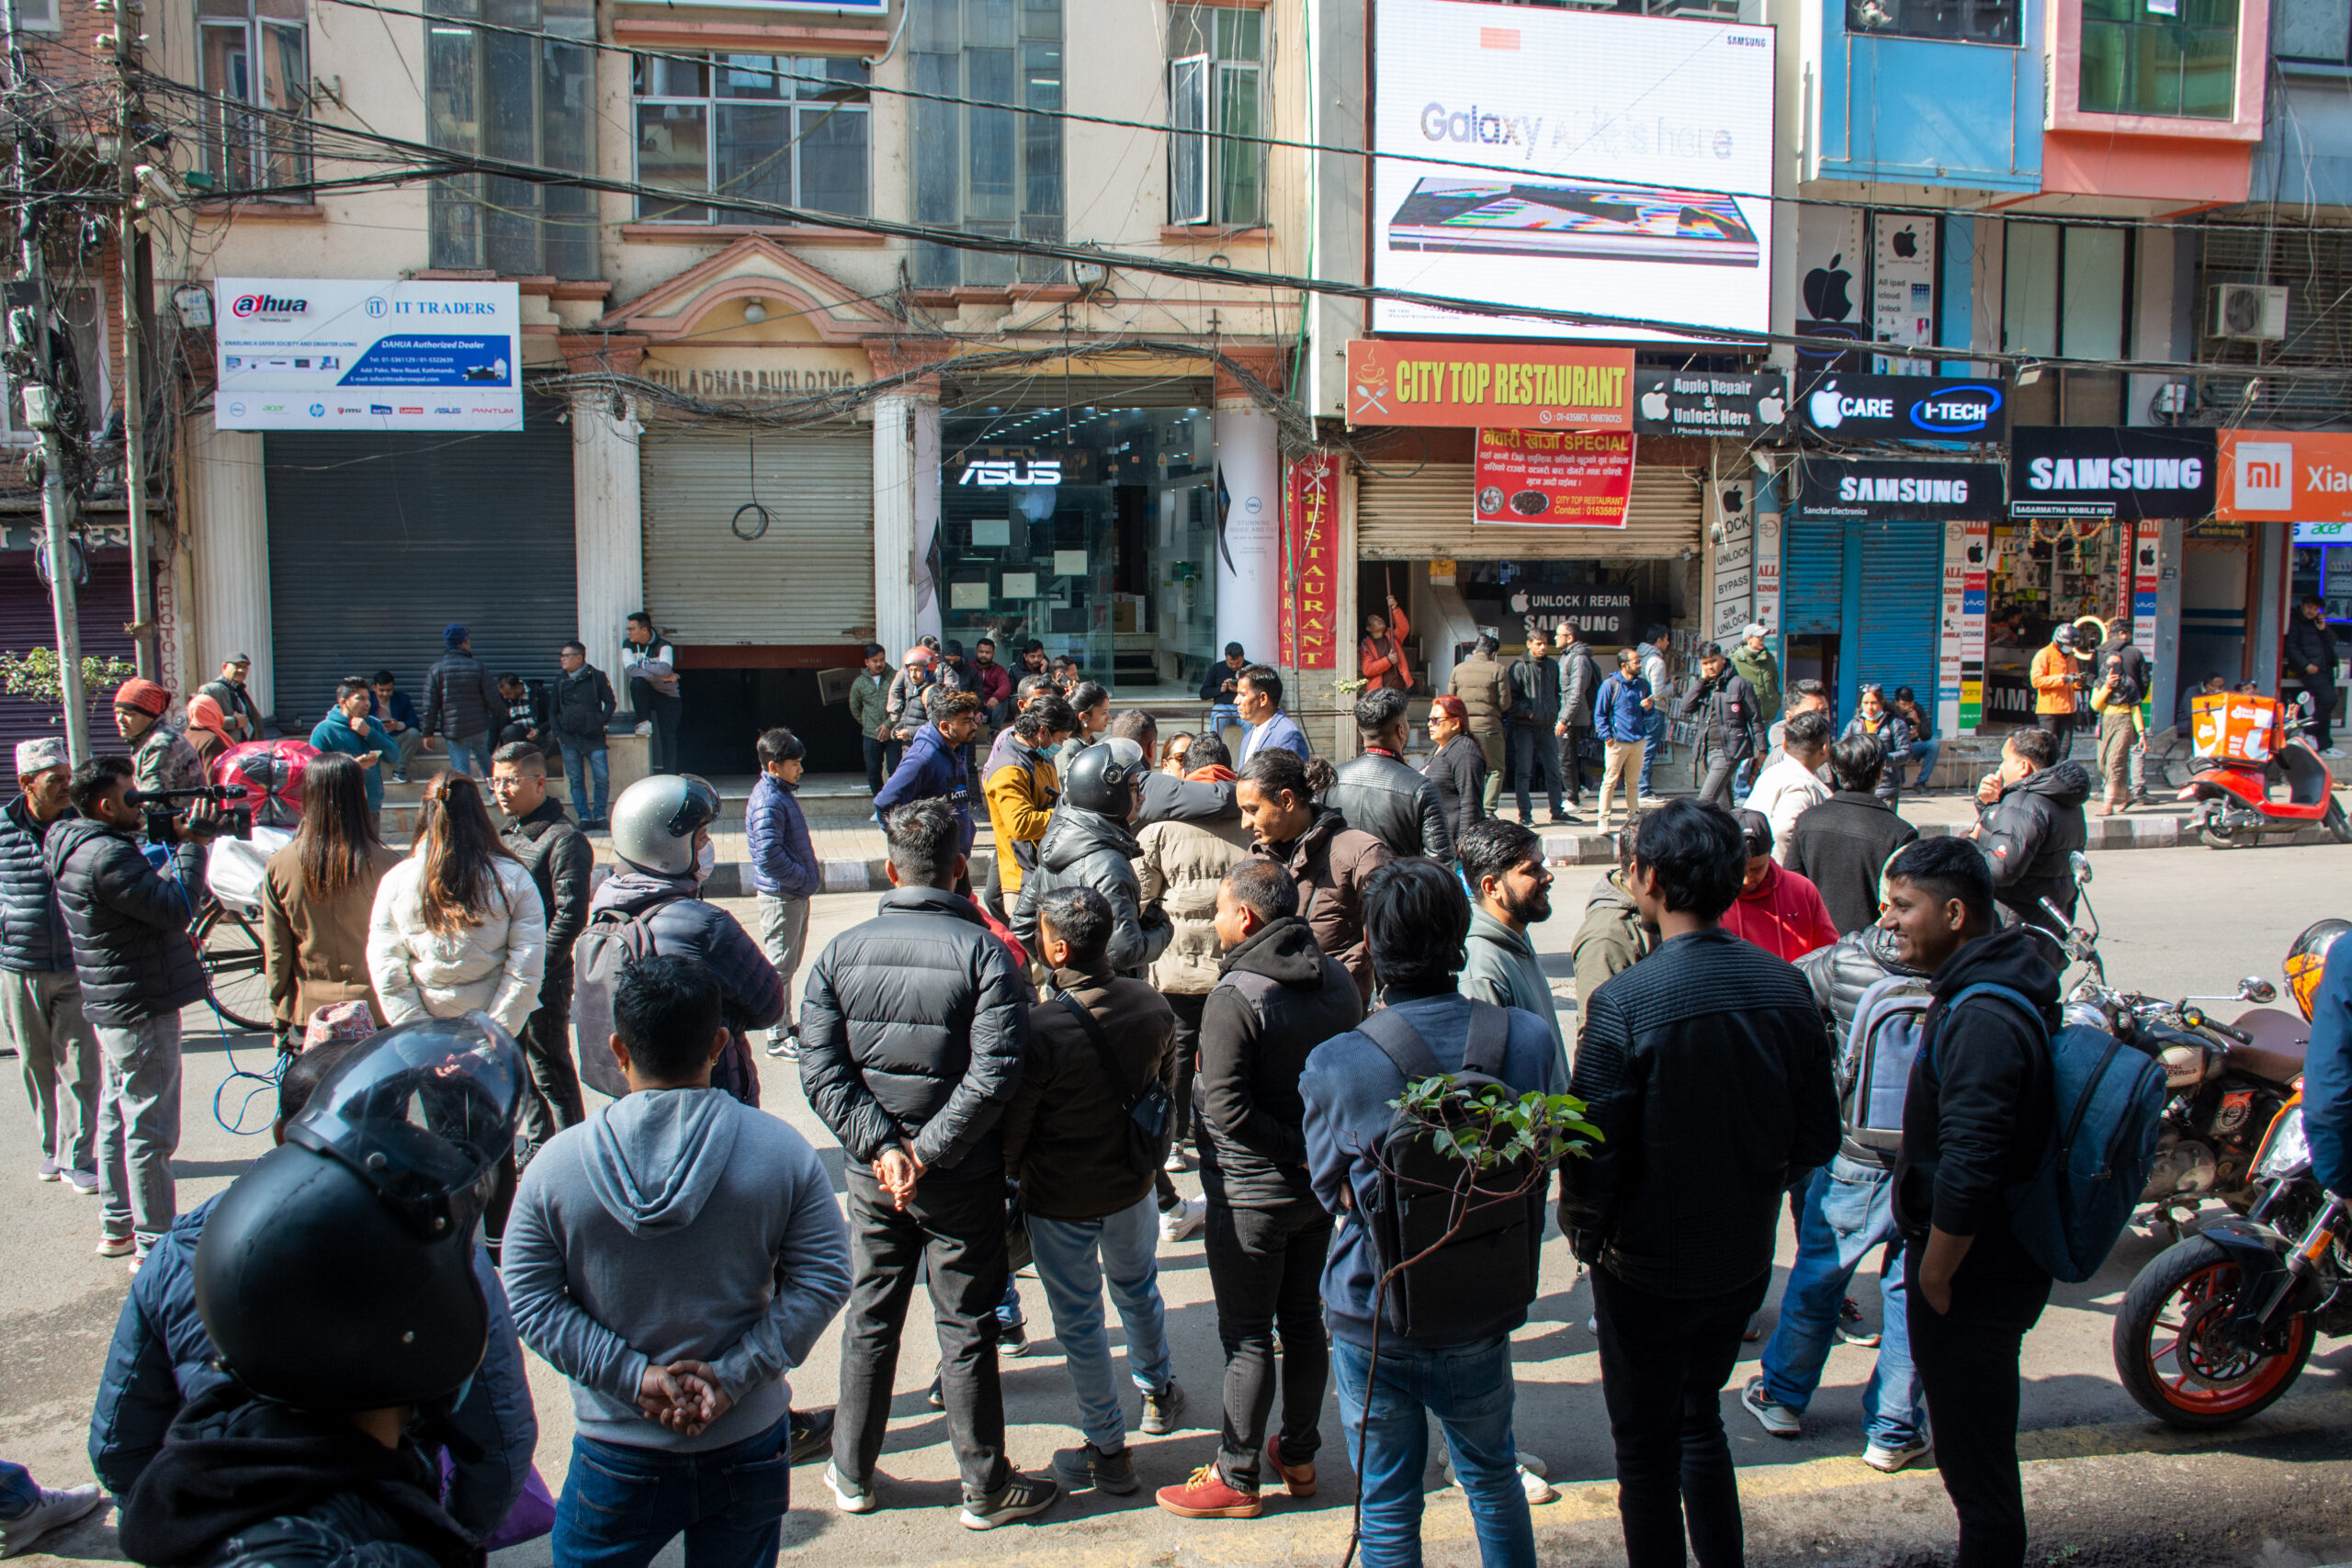 Protests emerge in response to New Road parking ban in Kathmandu